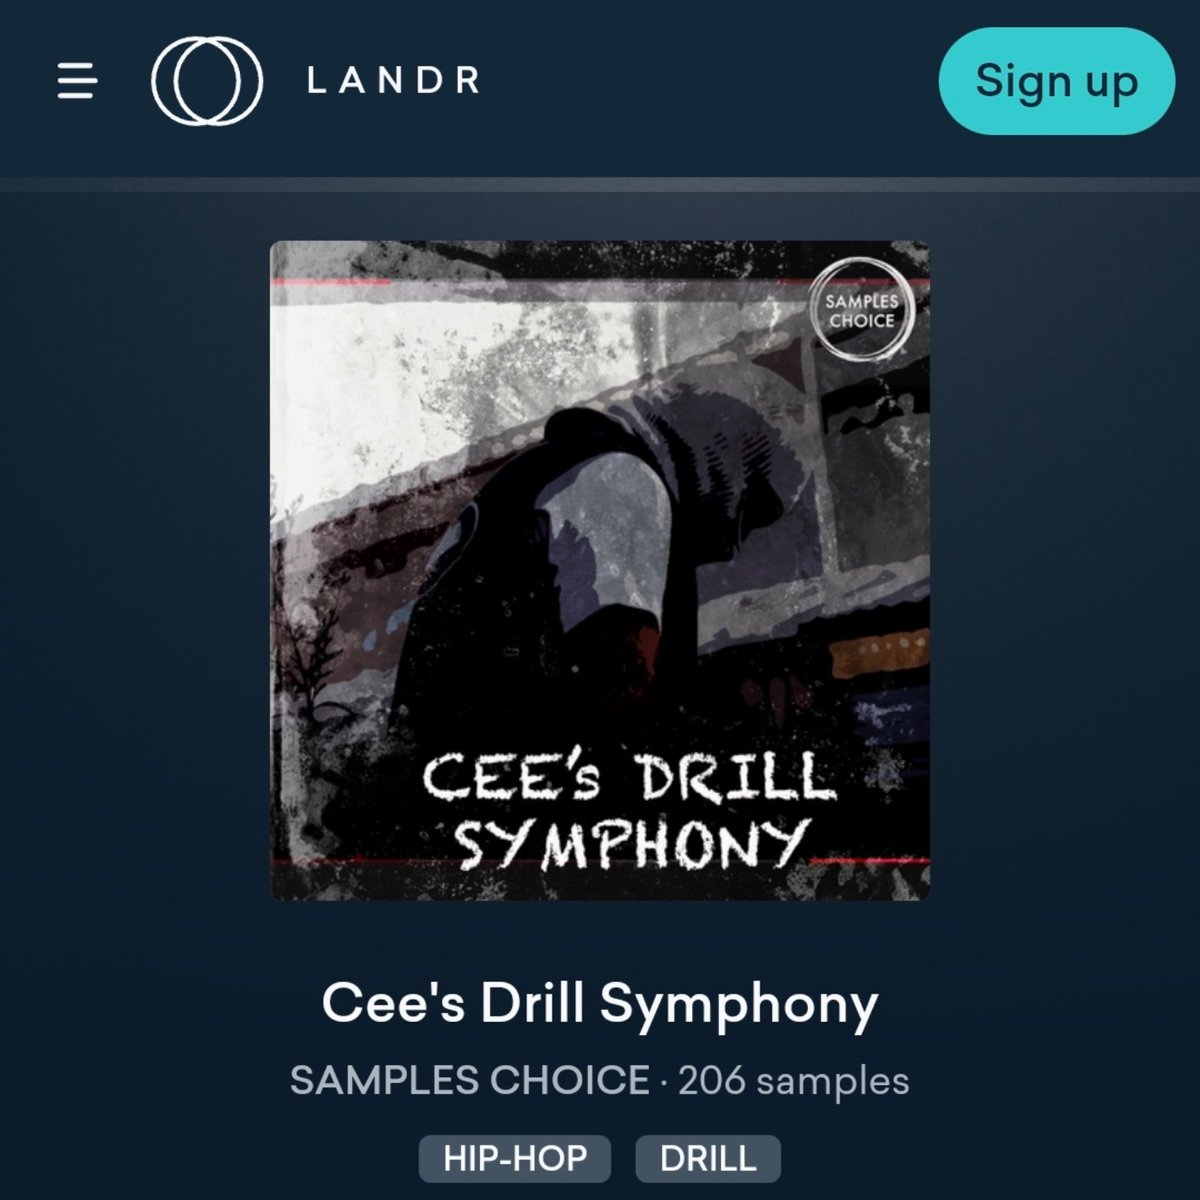 Cees's Drill Symphony 
Out now on @LANDR_music
samples.landr.com/packs/cees-dri…
#trapmusic #trapbeats #drillmusic #drillbeats #trappiano #trapvibes #hiphopbeats #musicproducer #producerlife #producerlifestyle #typebeat #musicpromo #abletonlive #hiphopproducer #beatproducer #typebeats